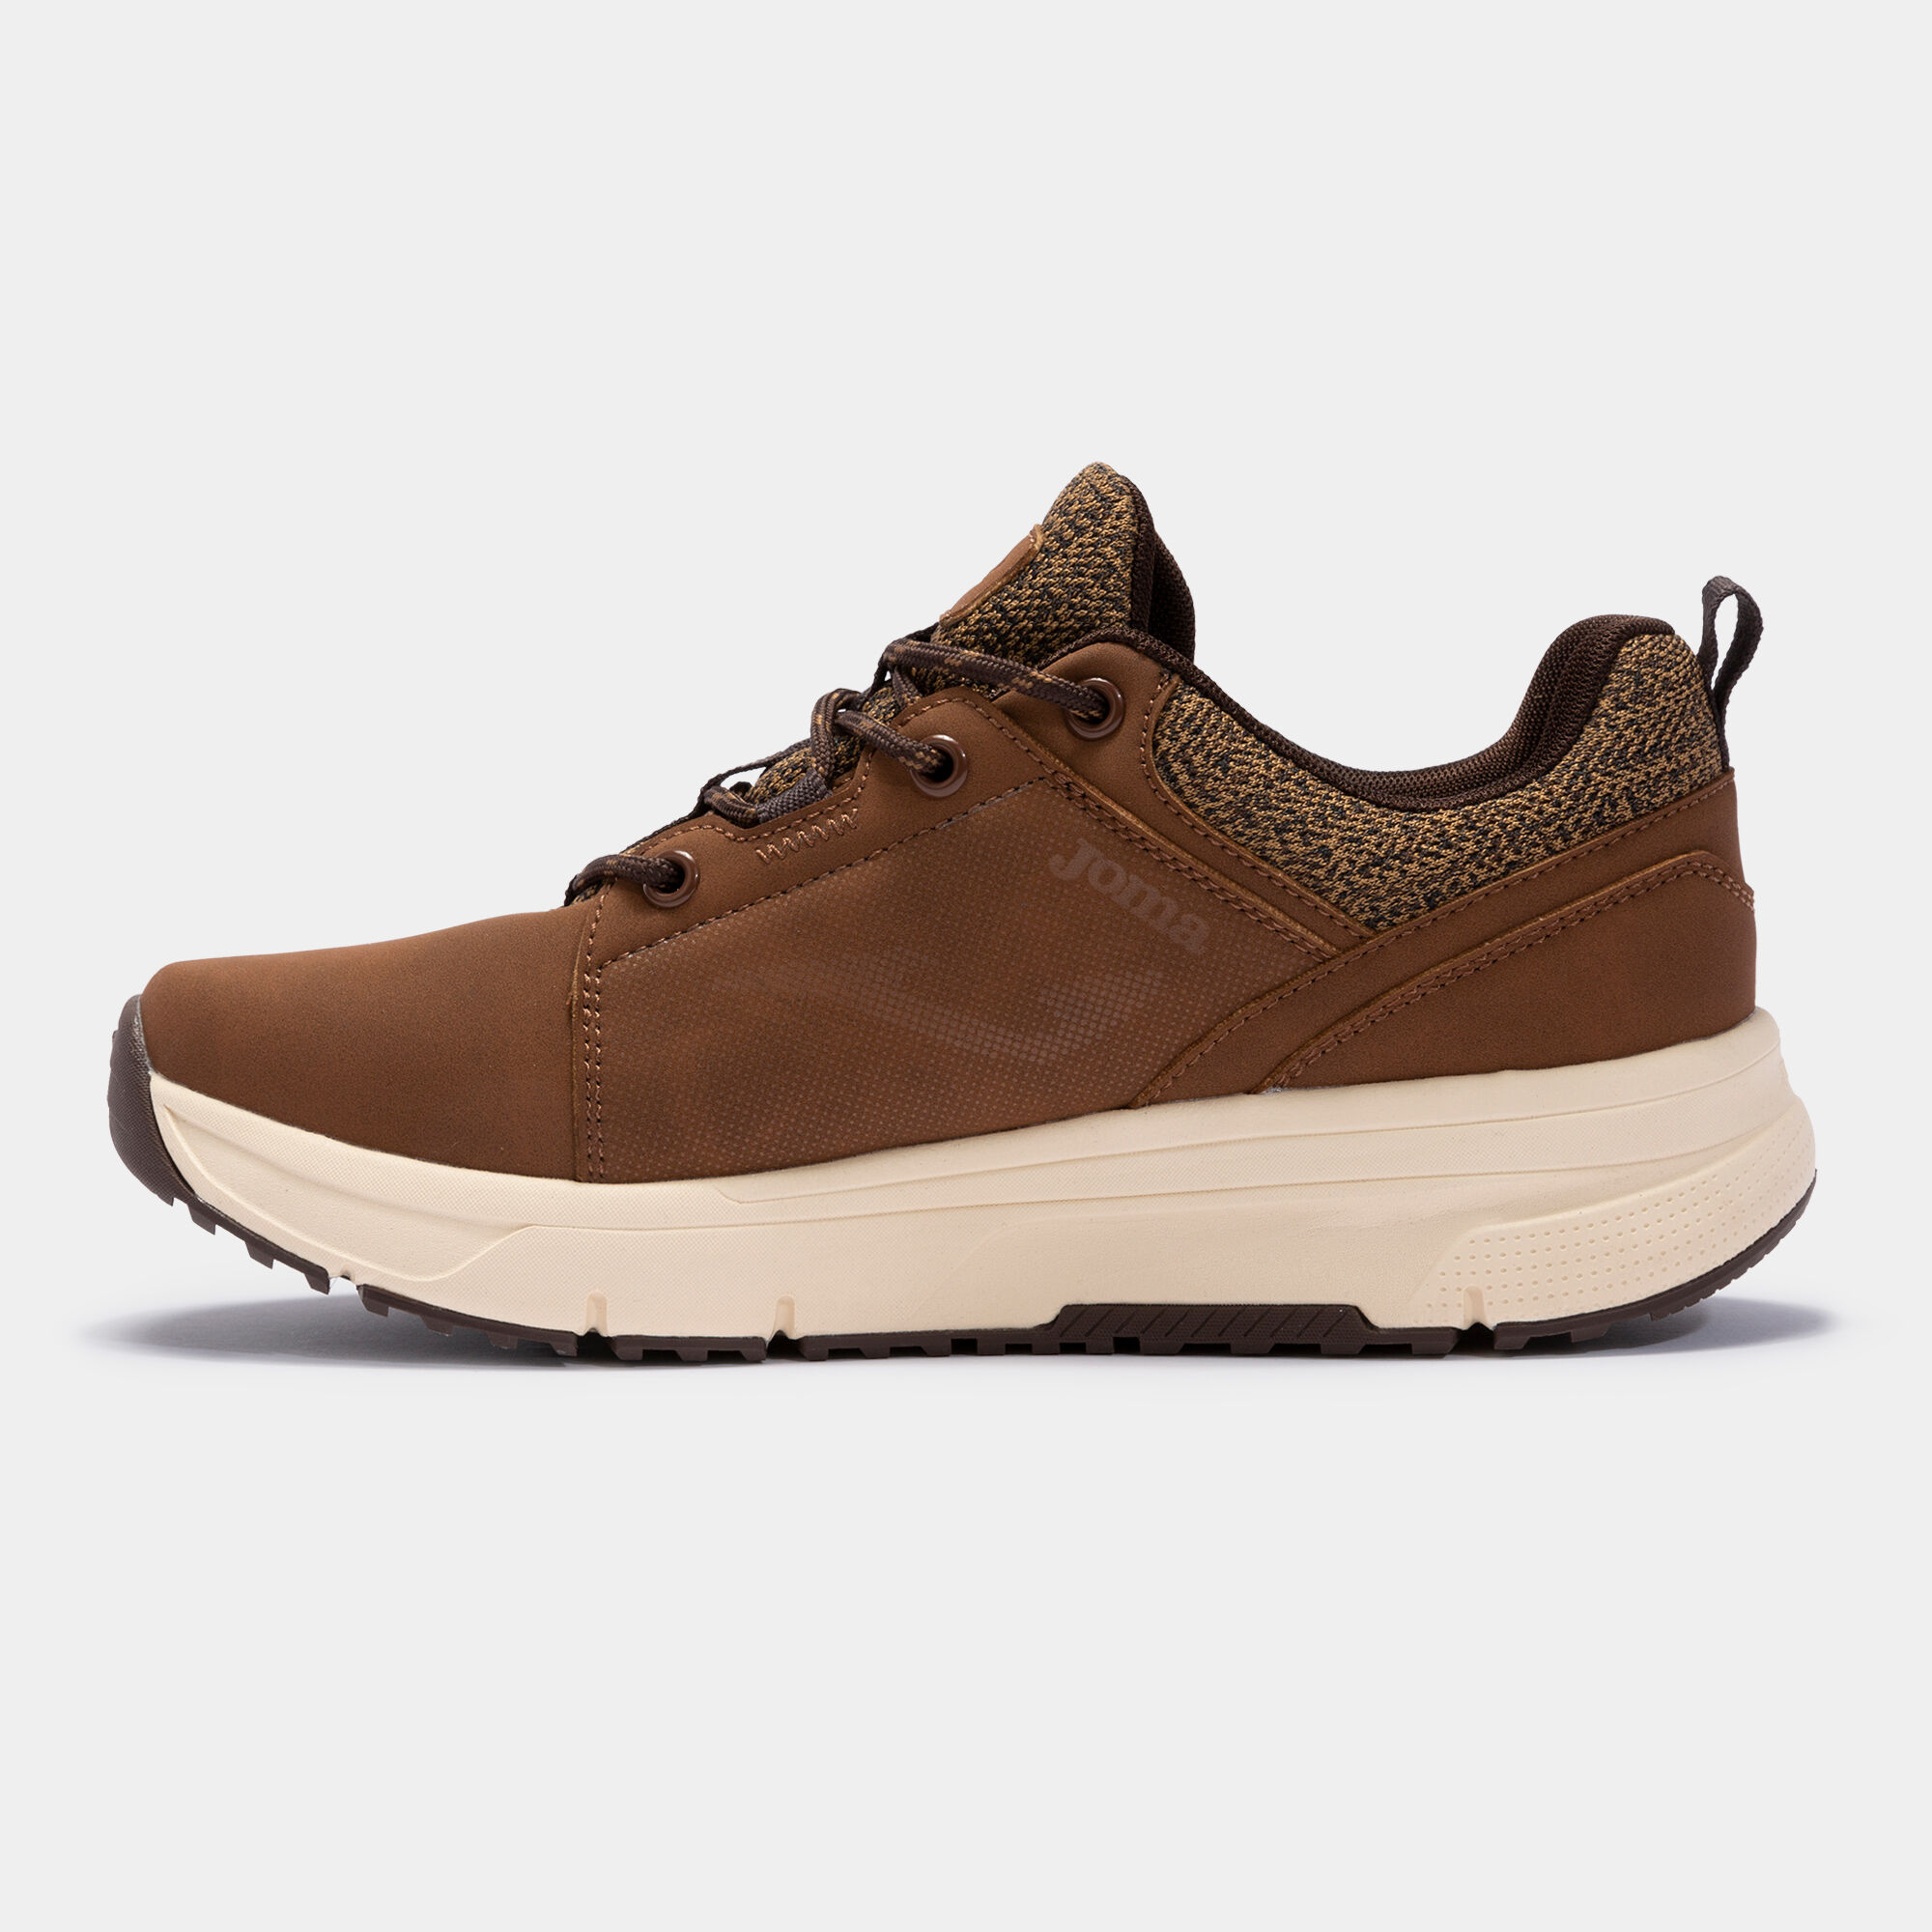 CHAUSSURES CASUAL SANABRIA 22 HOMME CAMEL